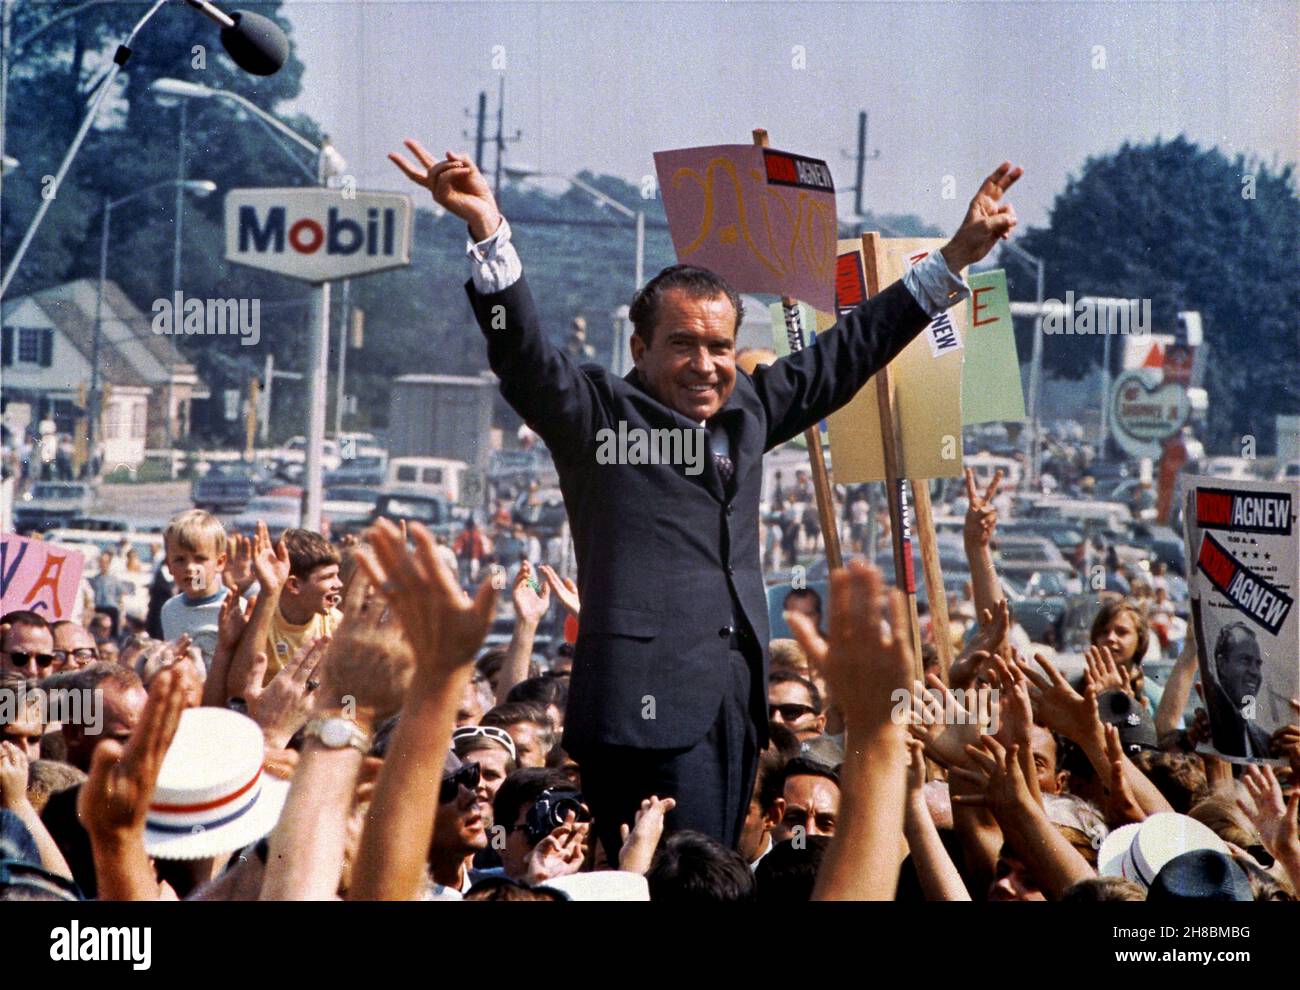 PAOLI, PA, USA - July 1968 - Richard Nixon gives his trademark victory sign while in Paoli, PA (Western Philadelphia Suburbs/Main Line) during his suc Stock Photo